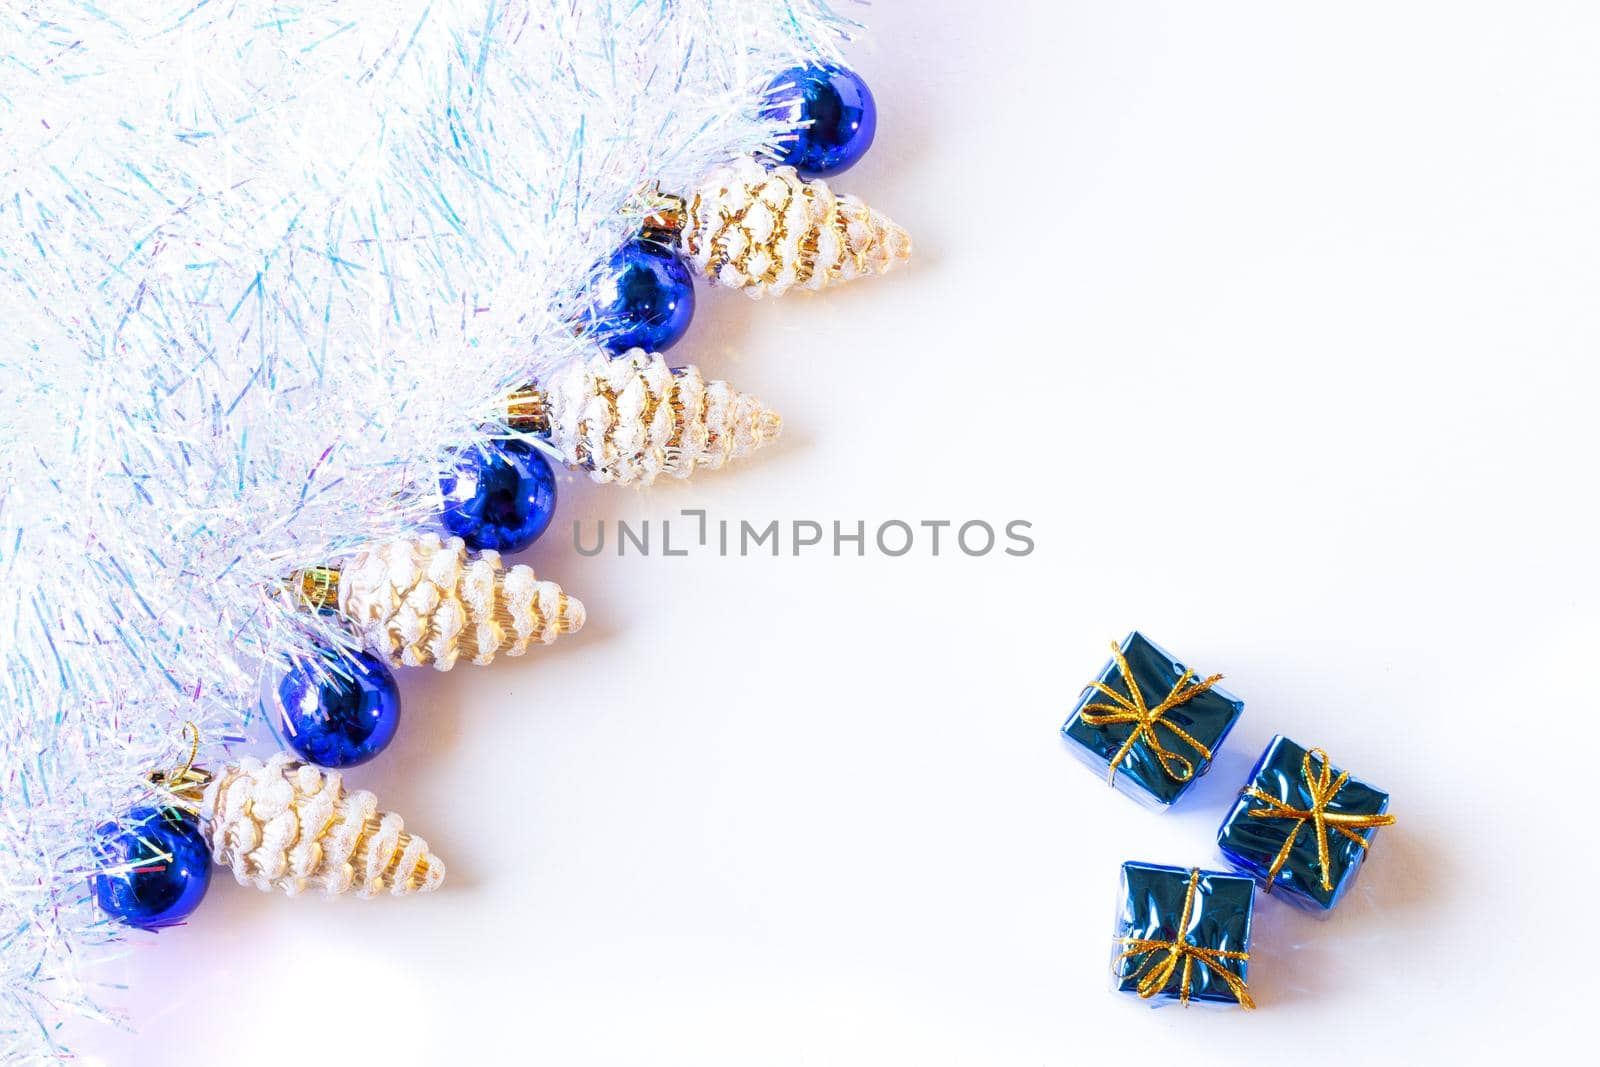 Christmas composition. Christmas decorations blue and gold on a white background with tinsel. Flat lay, top view, copy space by levnat09